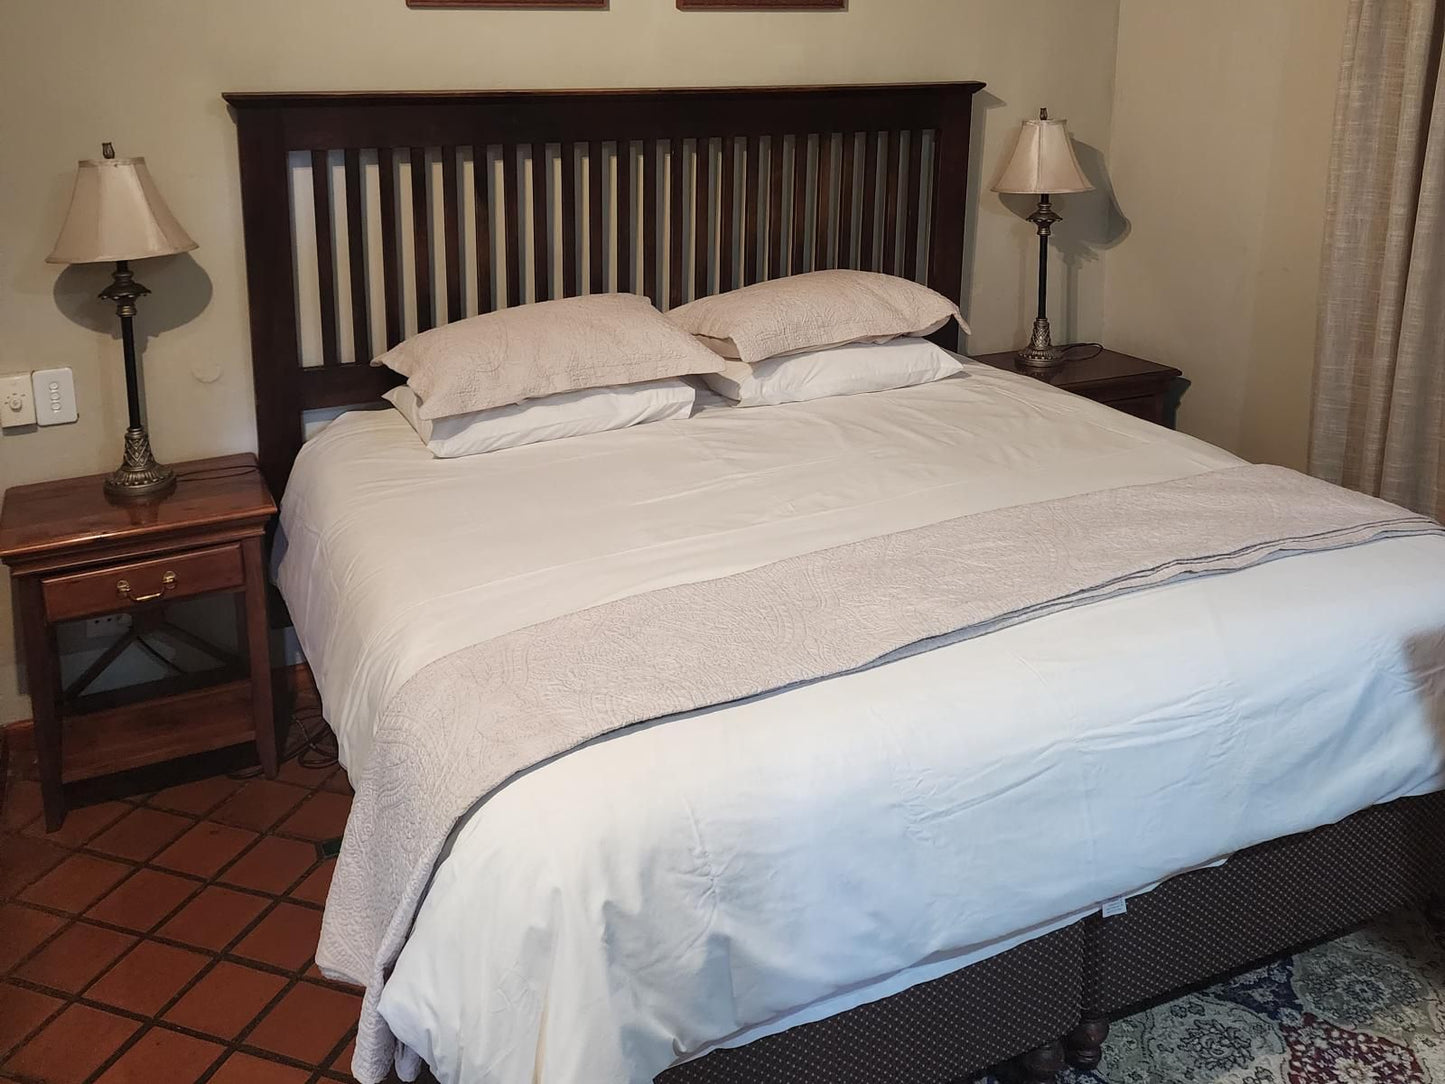 Fairview Hotels Spa And Golf Resort Tzaneen Limpopo Province South Africa Bedroom